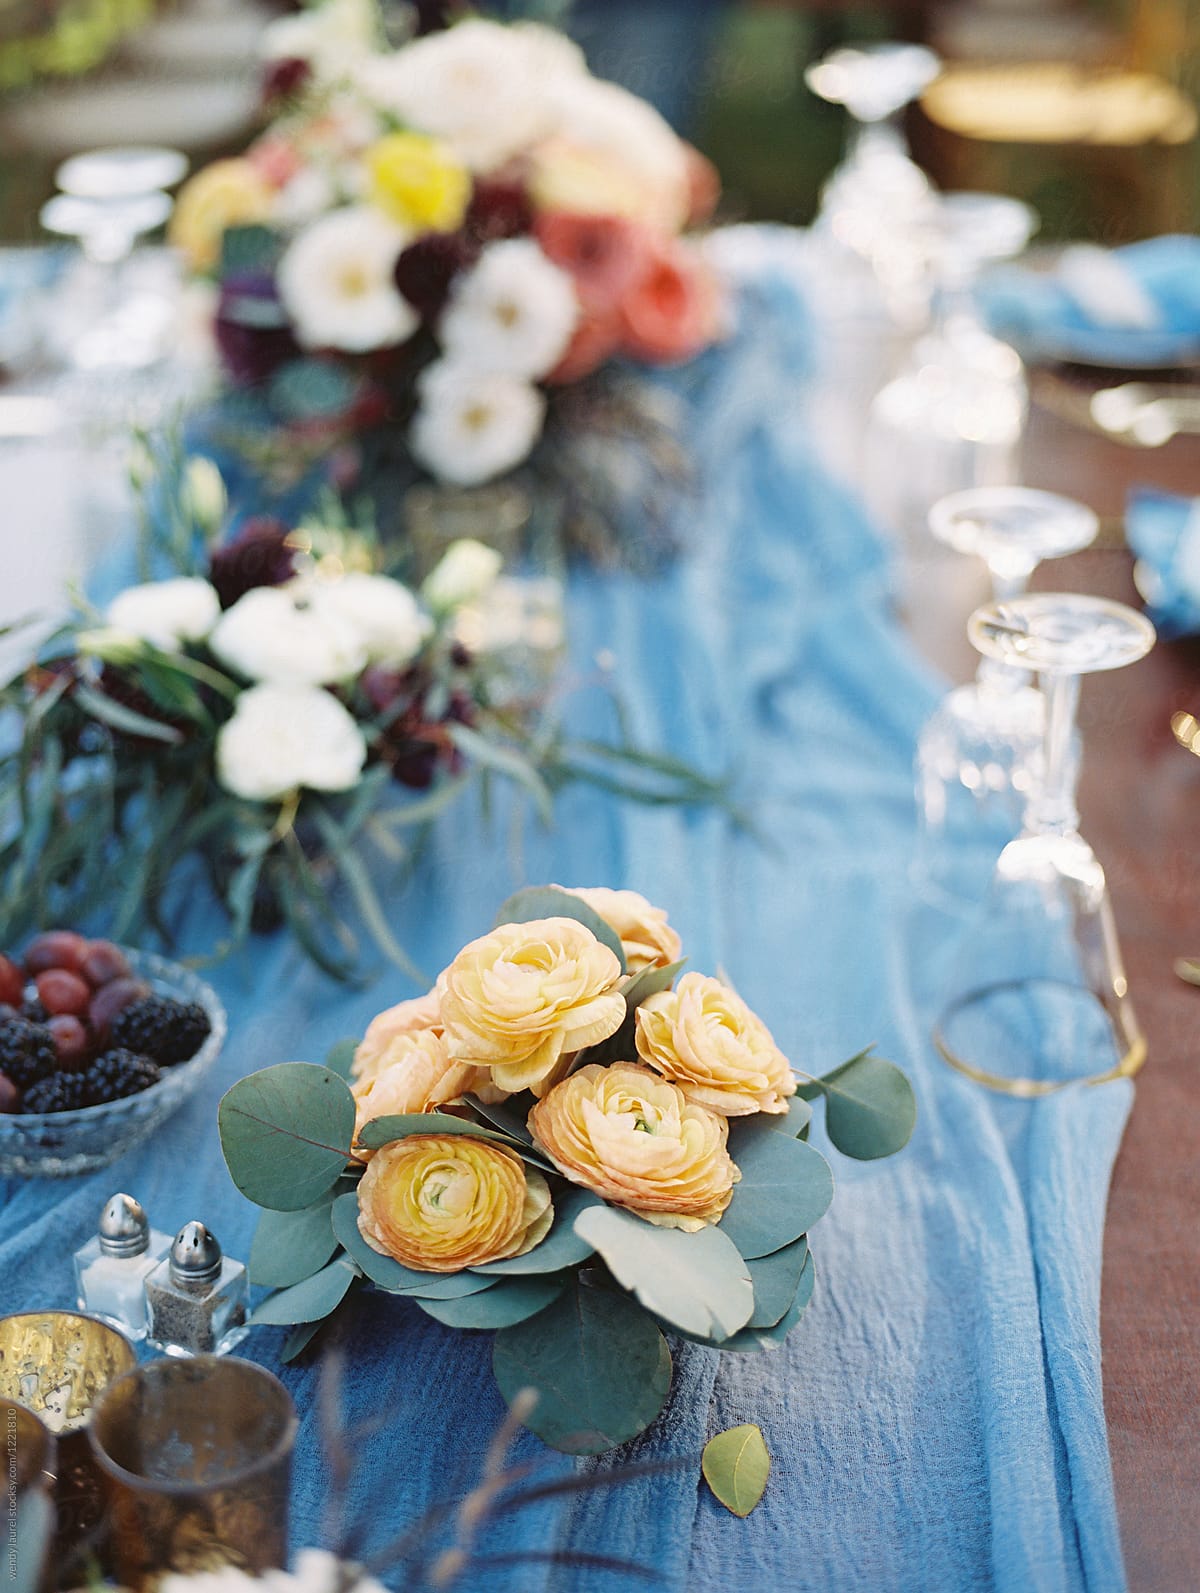 wedding decor at an outdoor reception in hawaii for a blue wedding